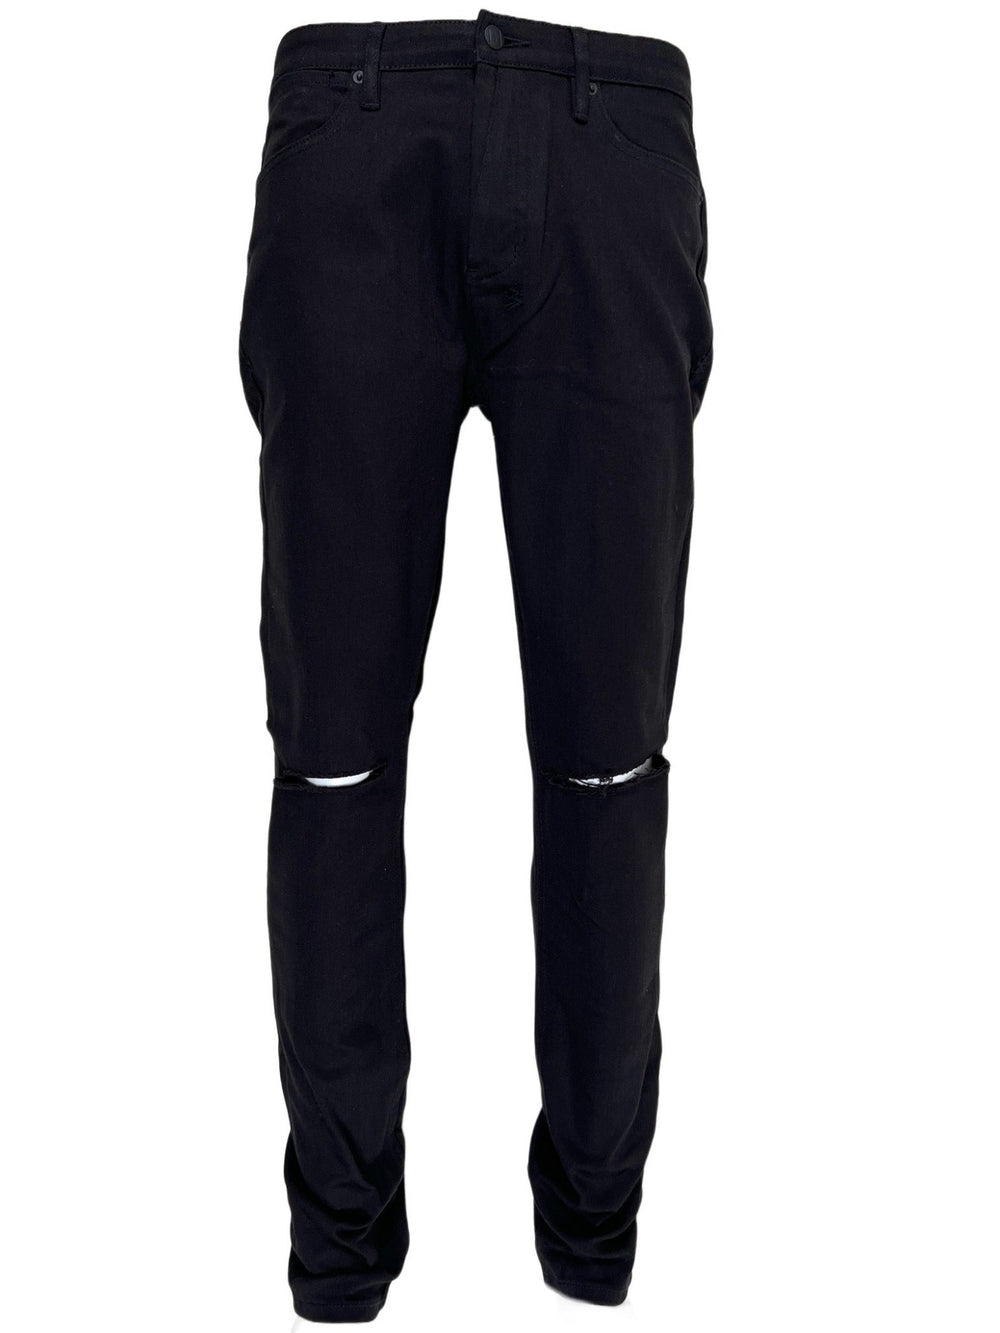 A pair of KSUBI VAN WINKLE ACE BLACK SLICE BLACK NEW jeans with a zipper on the side.